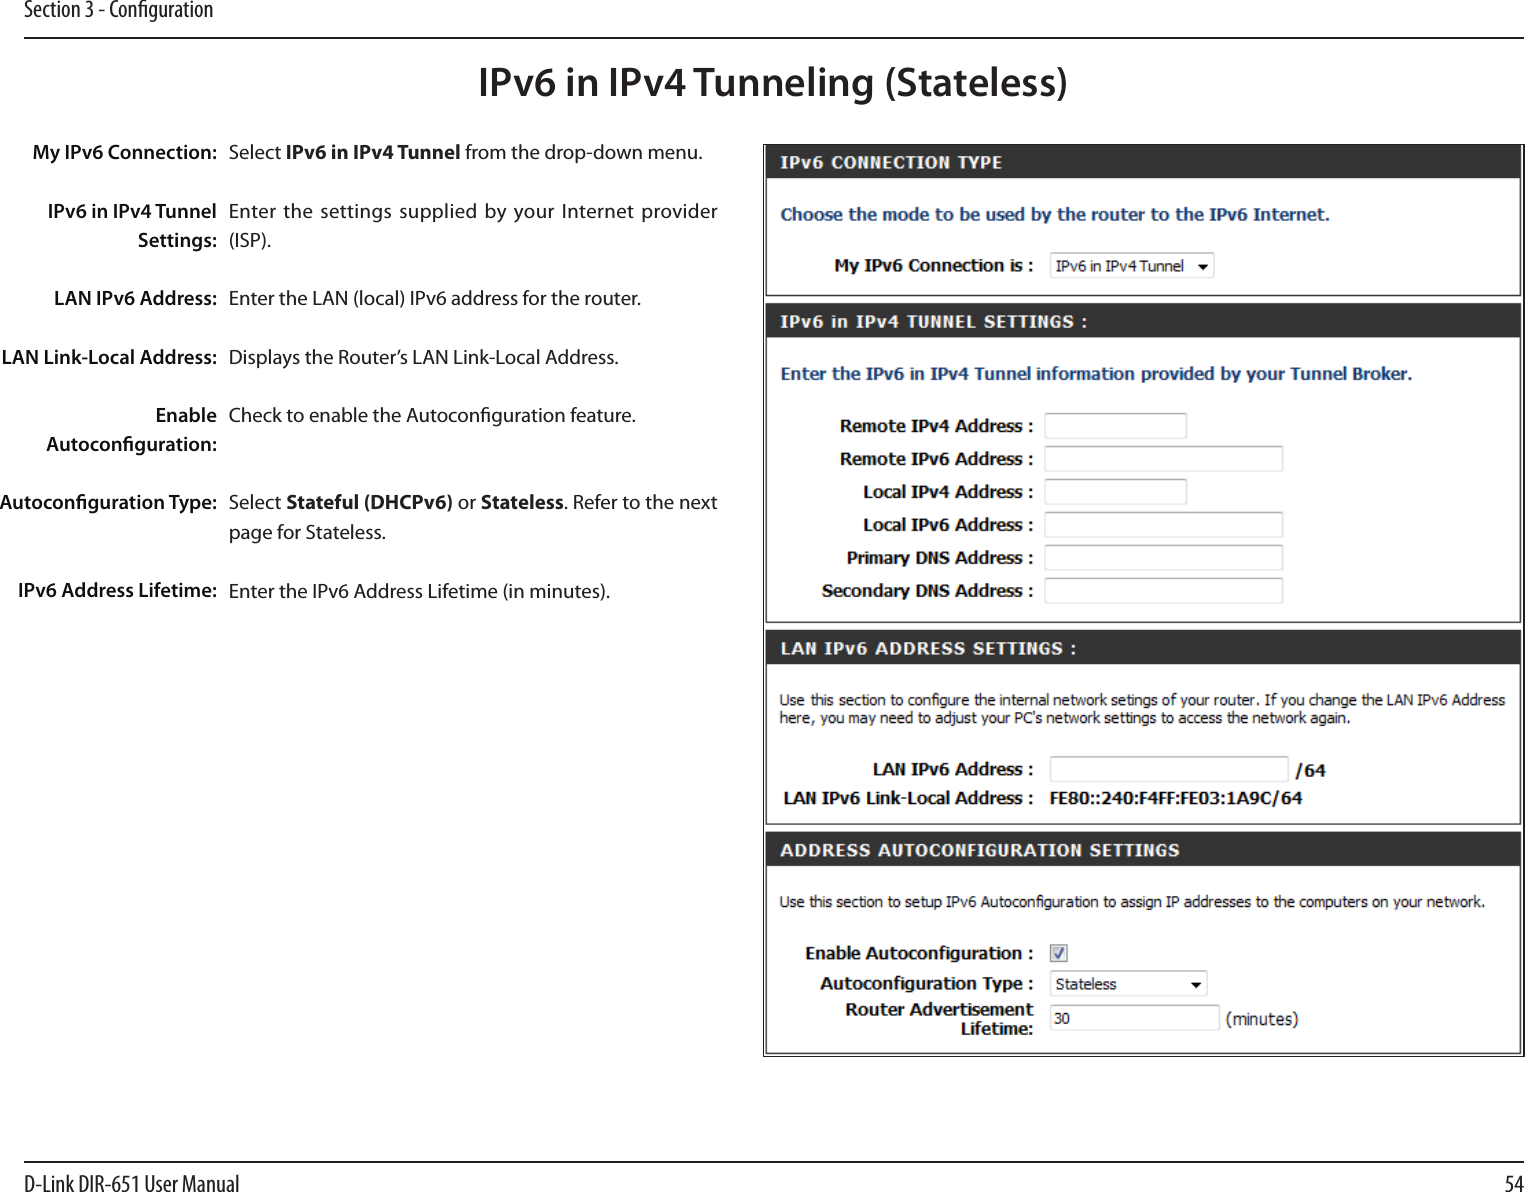 54D-Link DIR-651 User ManualSection 3 - CongurationIPv6 in IPv4 Tunneling (Stateless)Select IPv6 in IPv4 Tunnel from the drop-down menu.Enter the settings supplied  by your Internet  provider (ISP). Enter the LAN (local) IPv6 address for the router. Displays the Router’s LAN Link-Local Address.Check to enable the Autoconguration feature.Select Stateful (DHCPv6) or Stateless. Refer to the next page for Stateless.Enter the IPv6 Address Lifetime (in minutes).My IPv6 Connection:IPv6 in IPv4 Tunnel Settings:LAN IPv6 Address:LAN Link-Local Address:Enable Autoconguration:Autoconguration Type:IPv6 Address Lifetime: